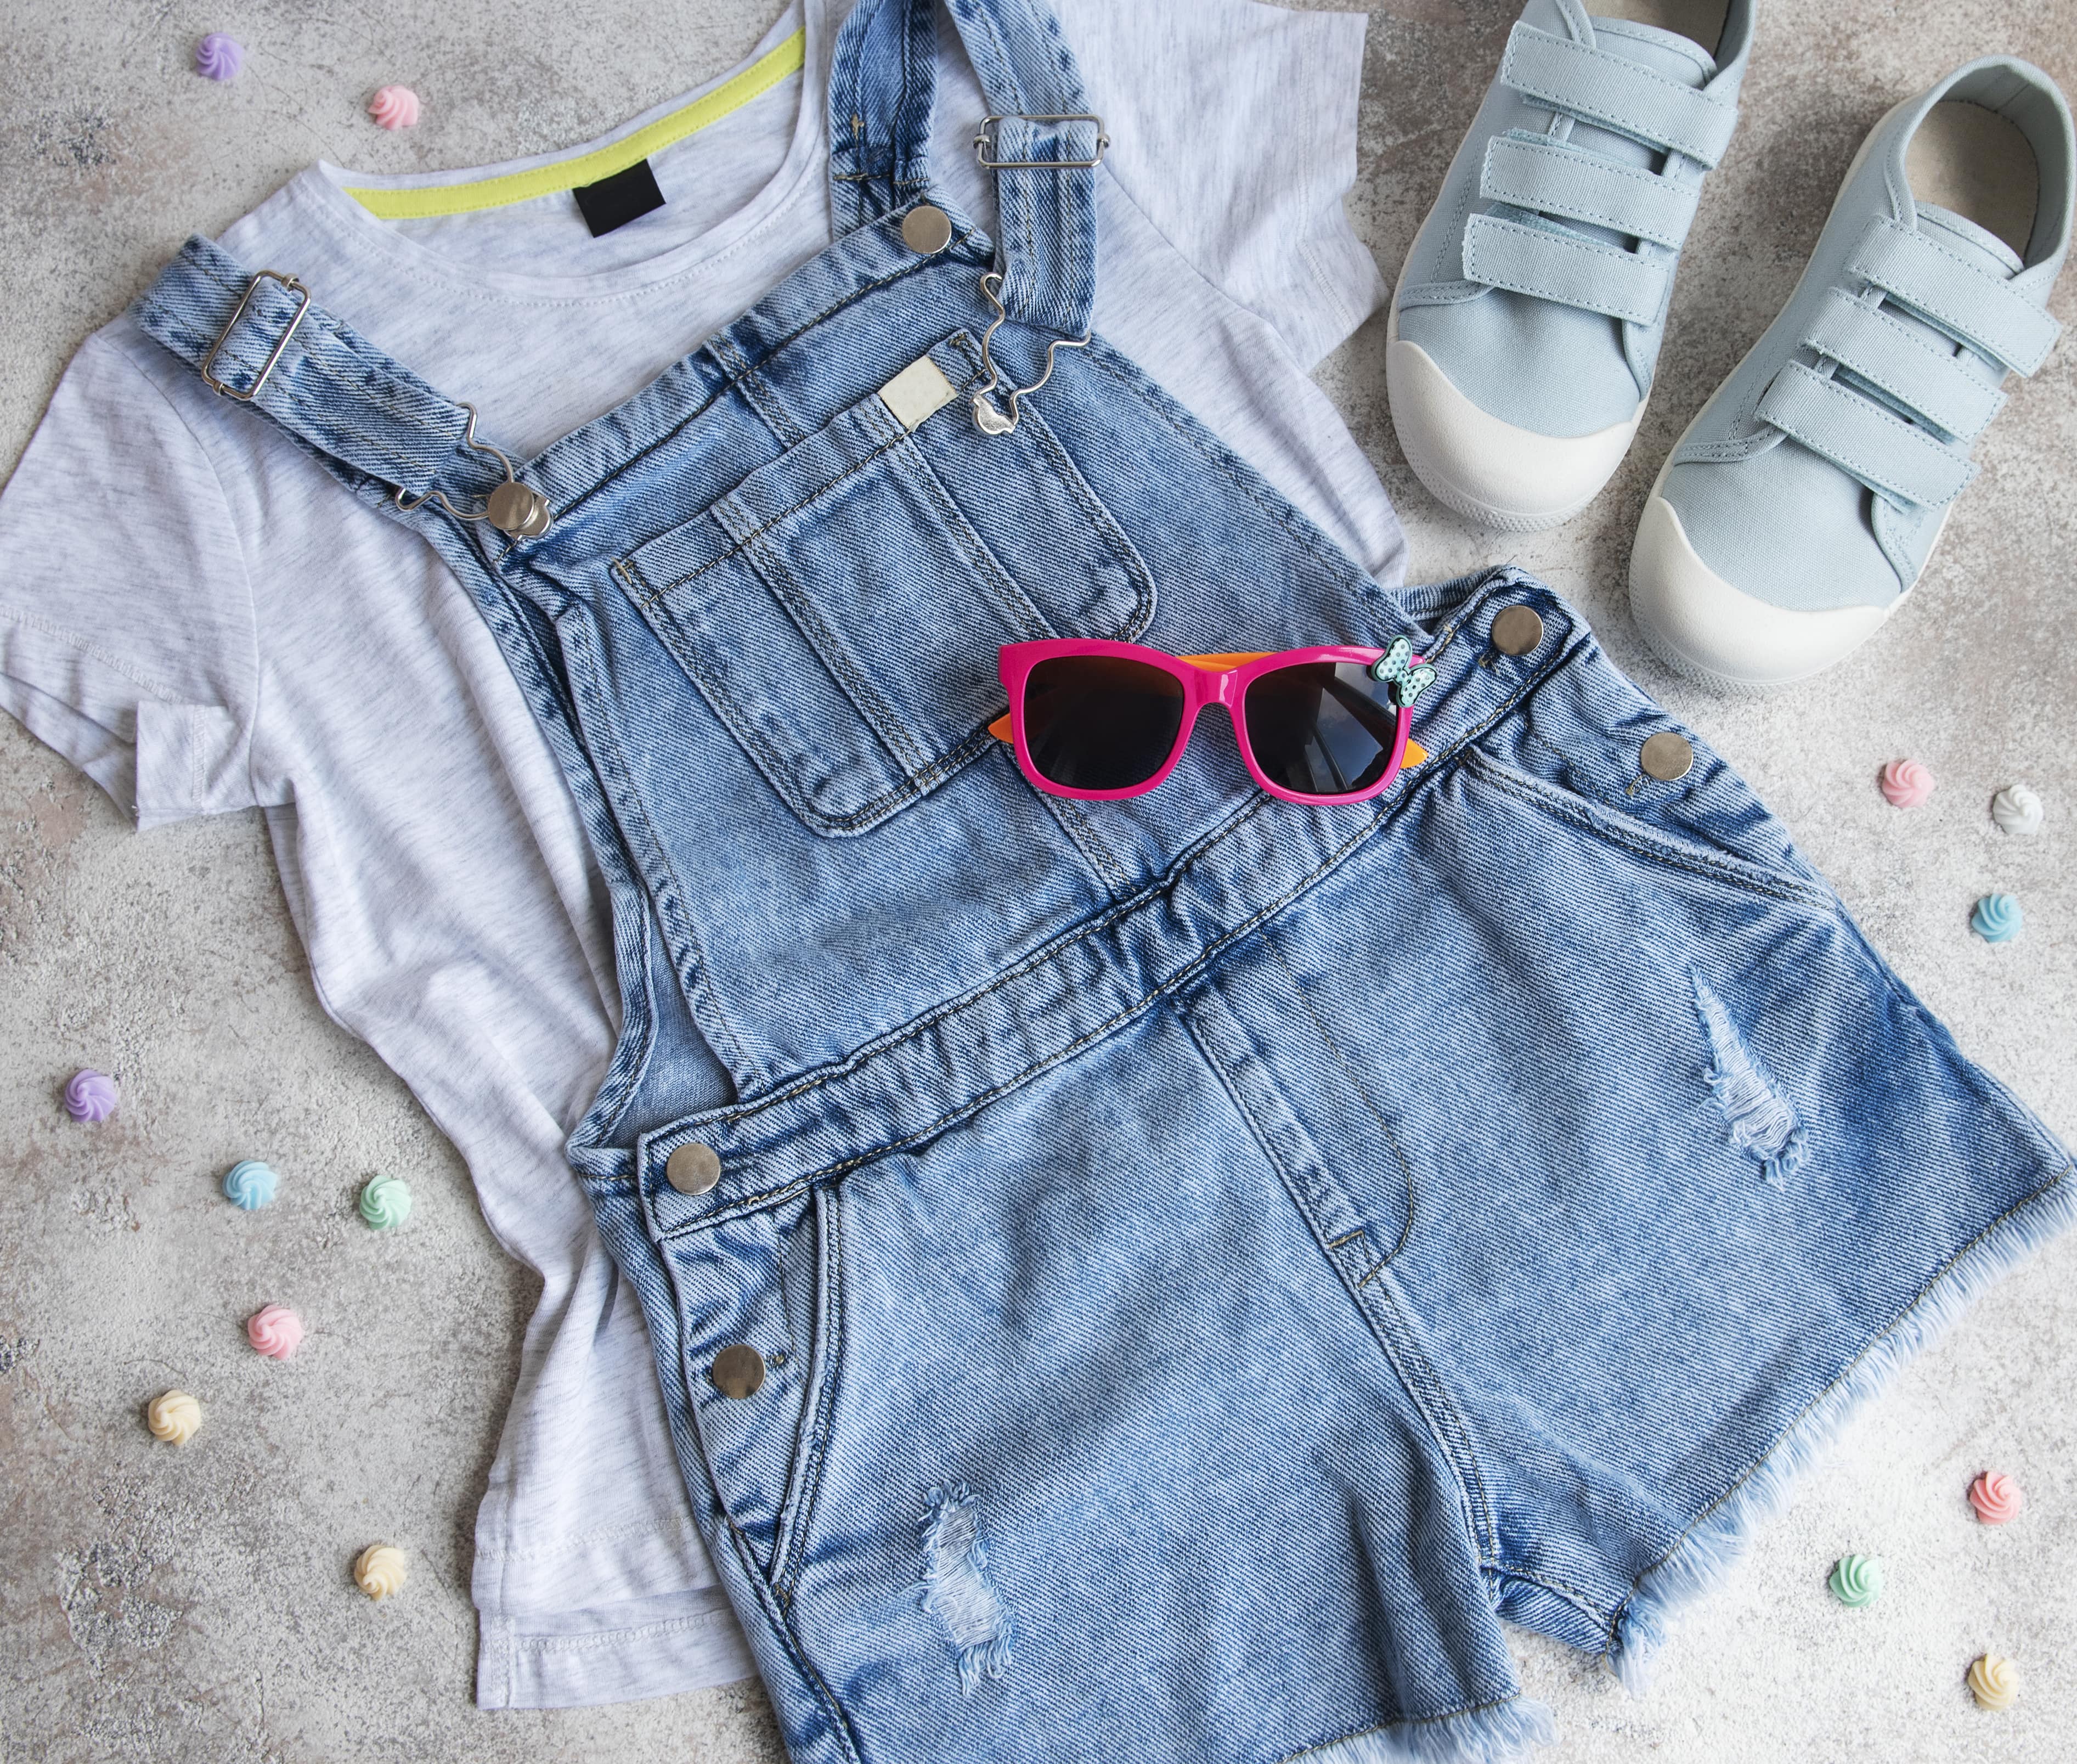 Dress Your Little Girl in Style with Our Adorable Baby Clothes for Girls